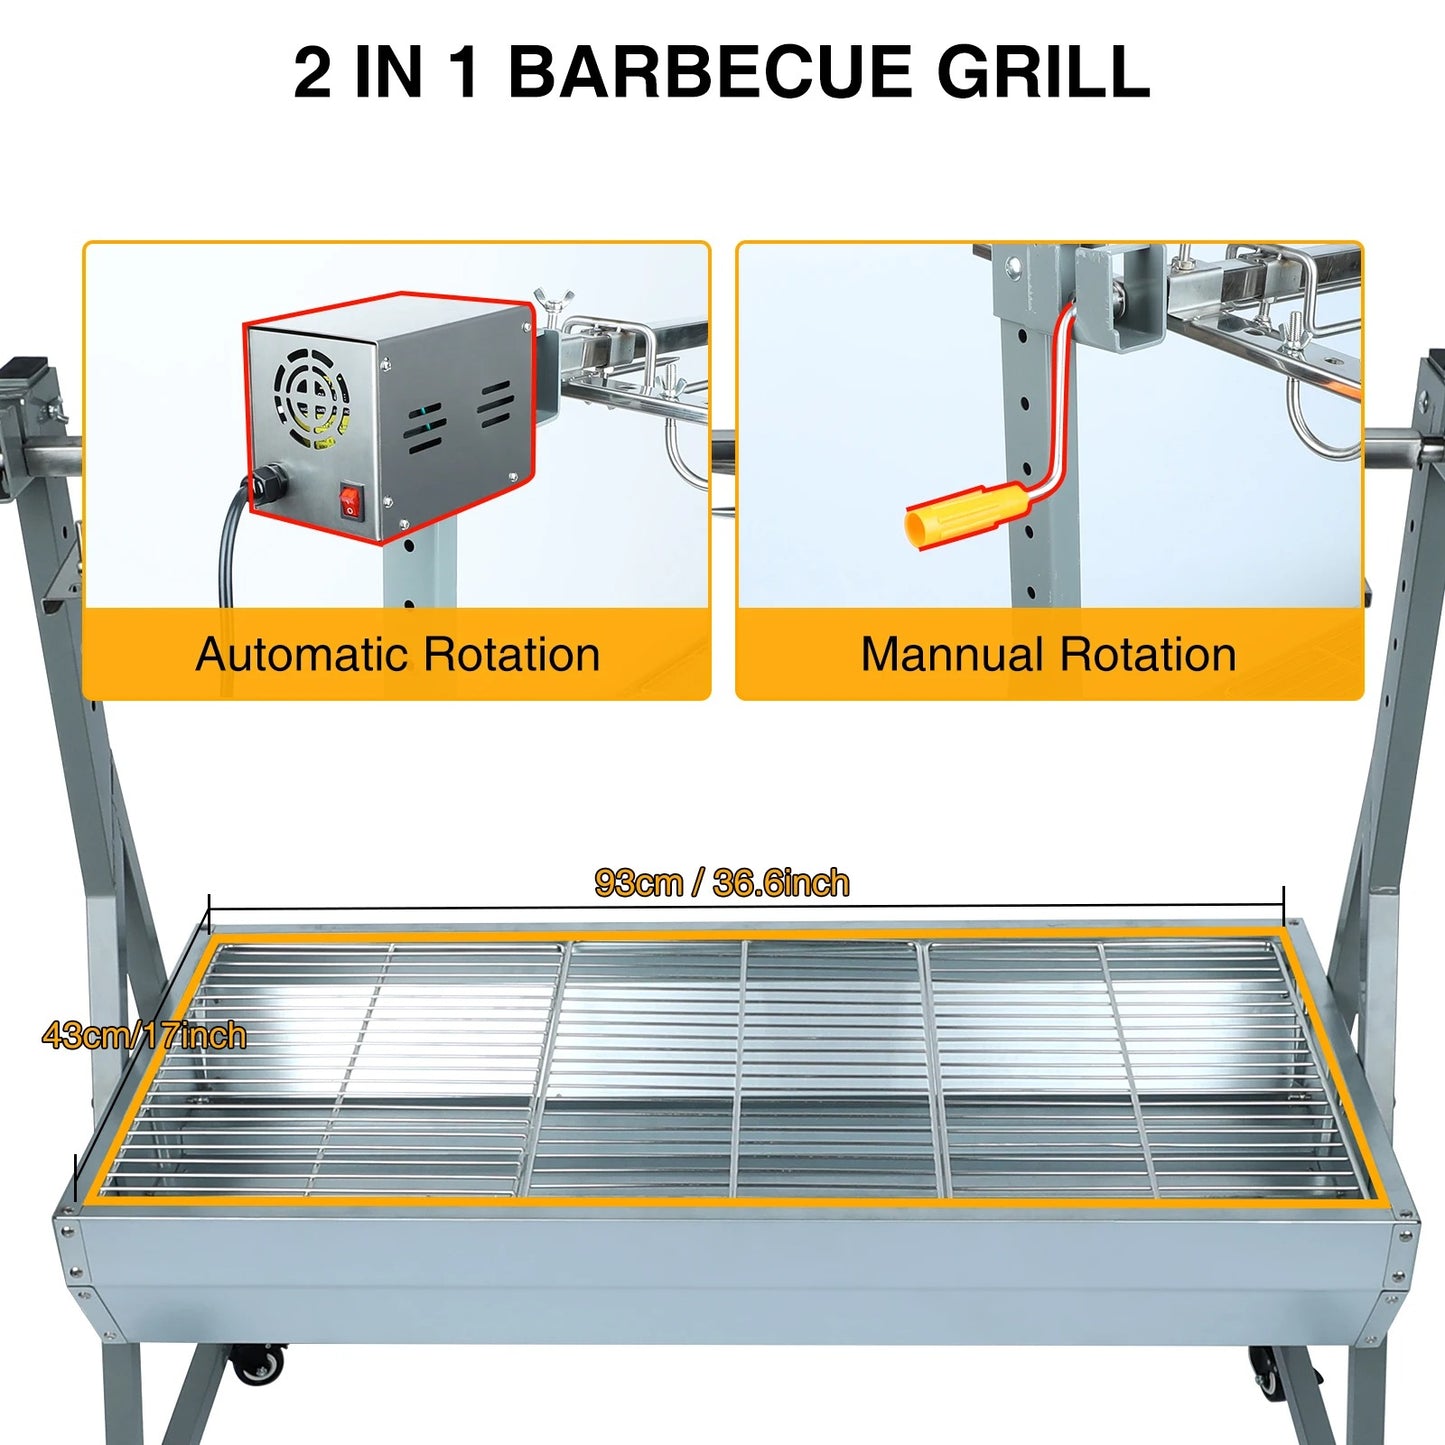 (NEW) Rotisserie Grill Roaster, 132lbs Charcoal Grill Outdoor BBQ Grill Pig Lamb Spit Roaster with 25W Motor